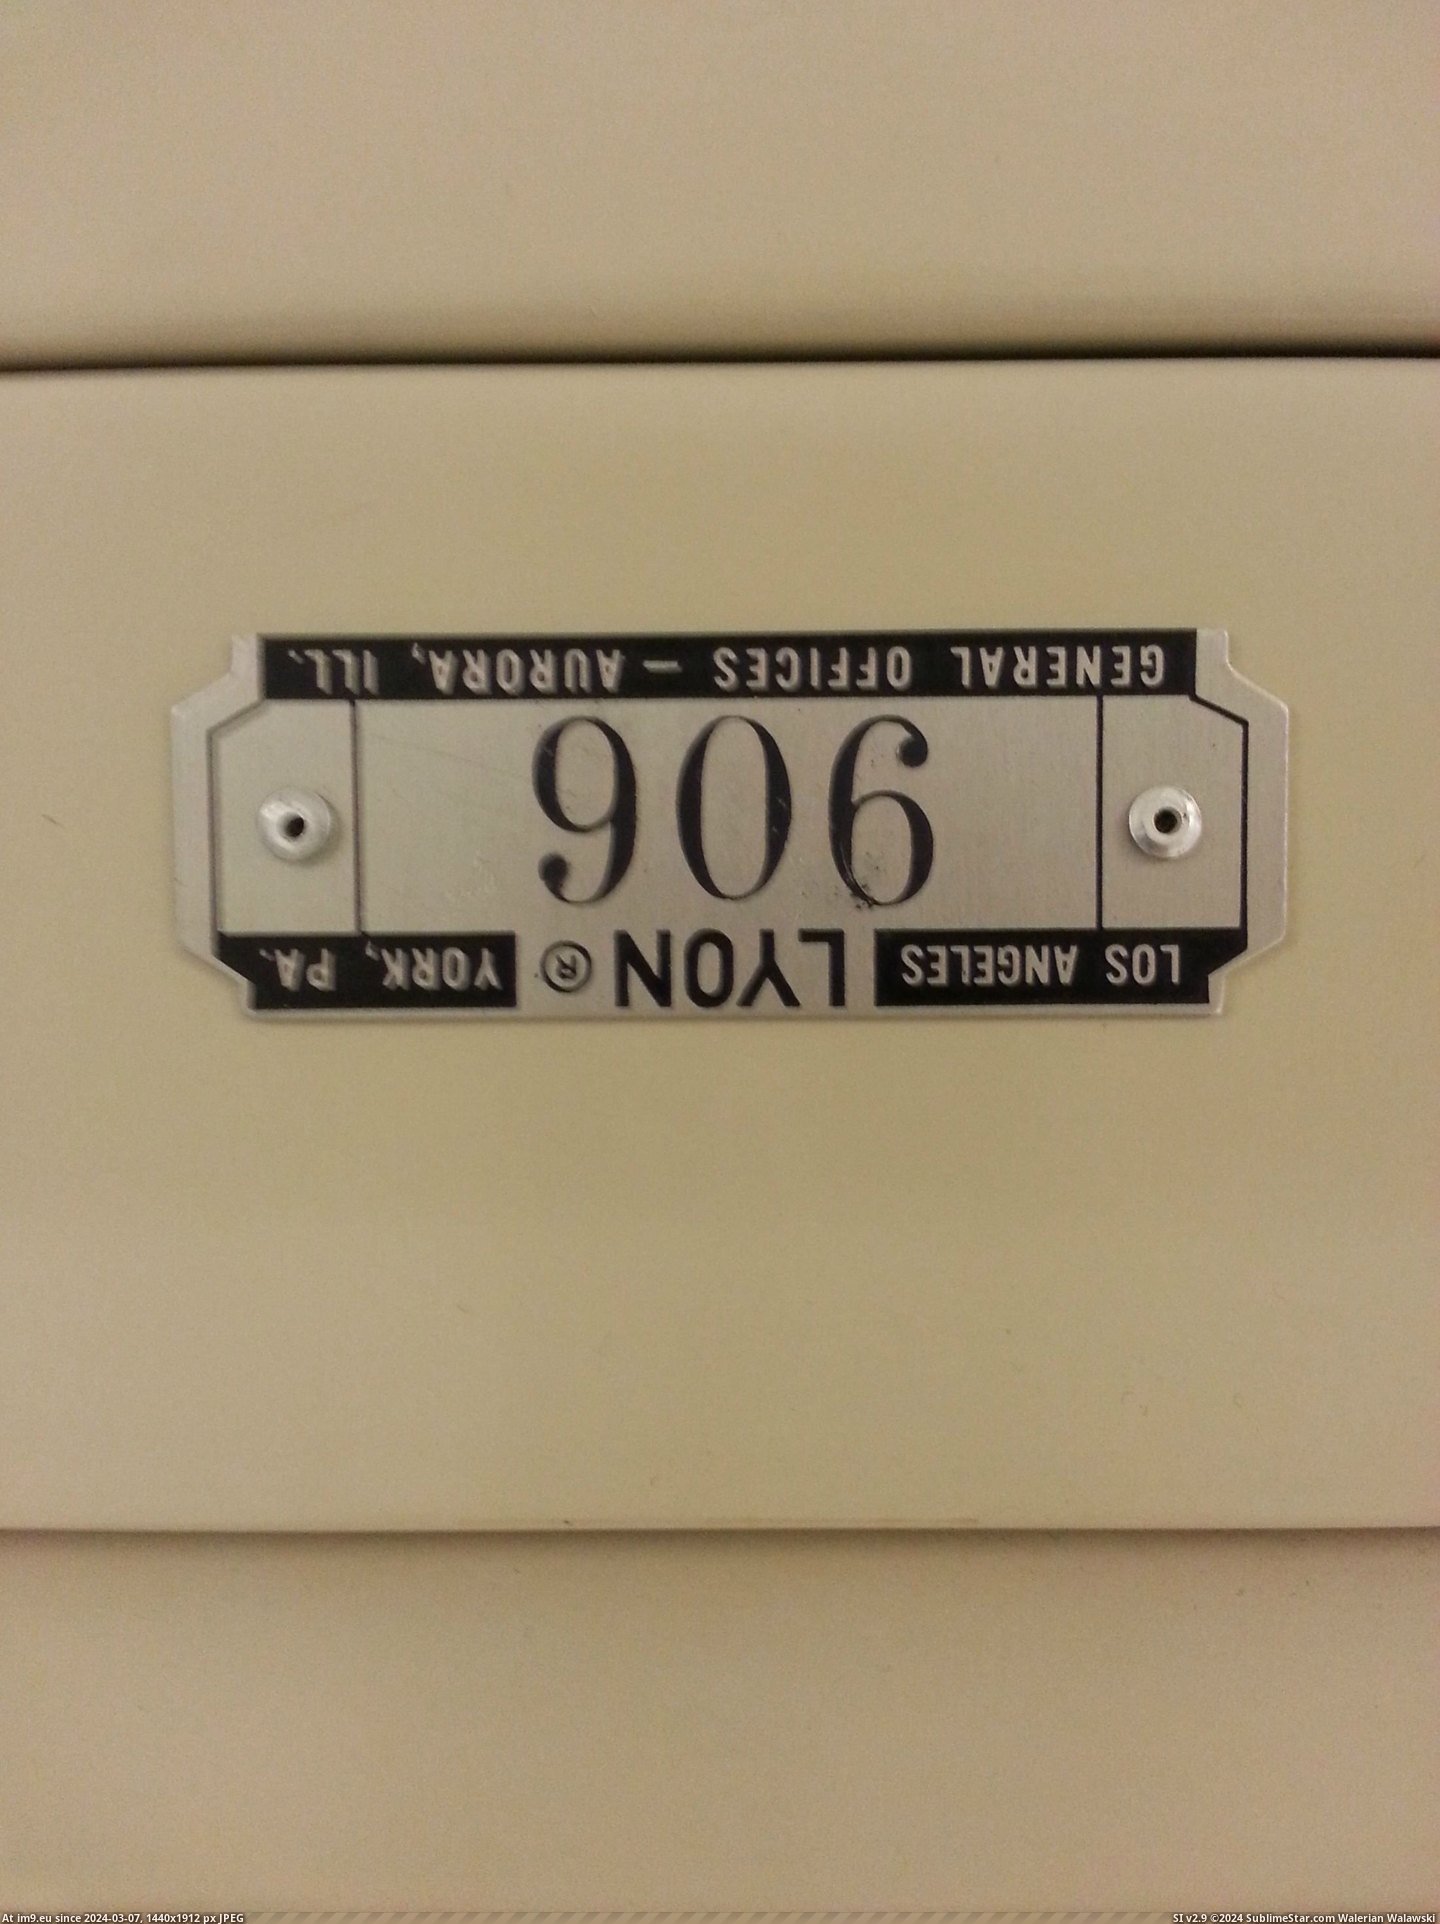 #Number #Upside #Plaque #Correct #Locker [Mildlyinteresting] The plaque on this locker is upside down but the number is still correct. Pic. (Image of album My r/MILDLYINTERESTING favs))